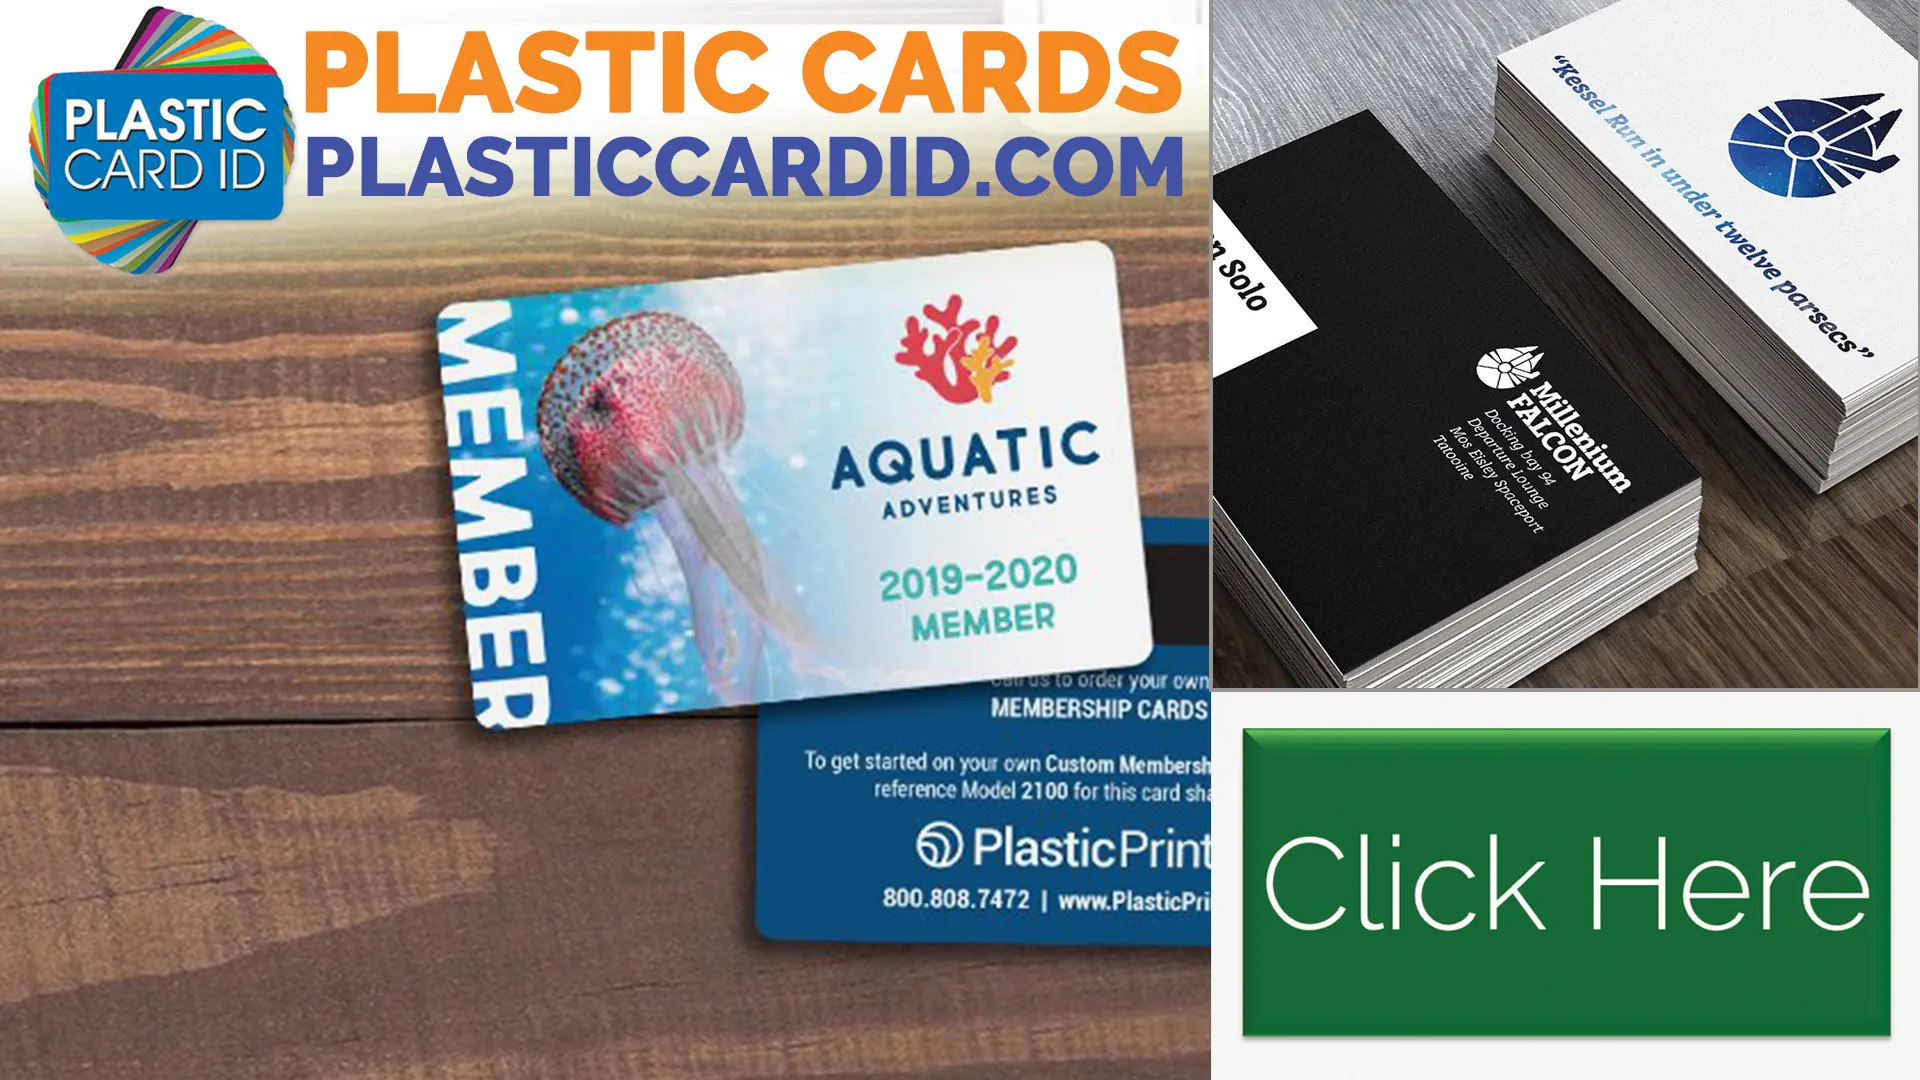 Why Choose Our Loyalty Plastic Cards?